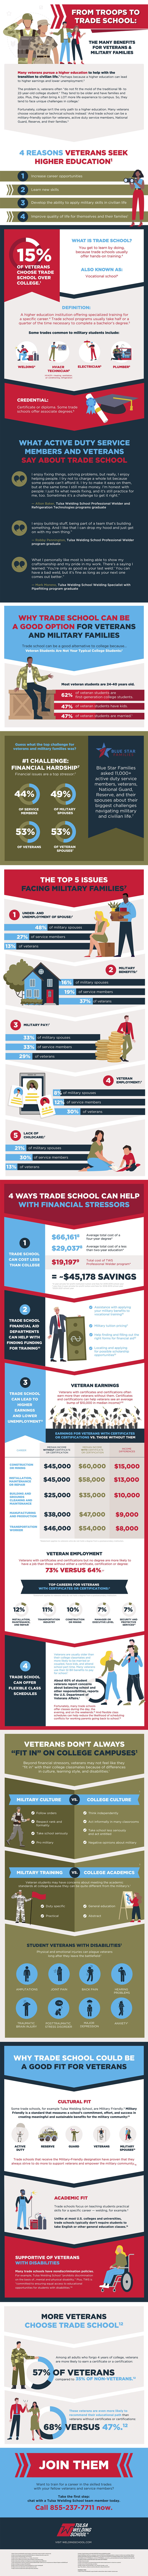 from troops to trade school infographic